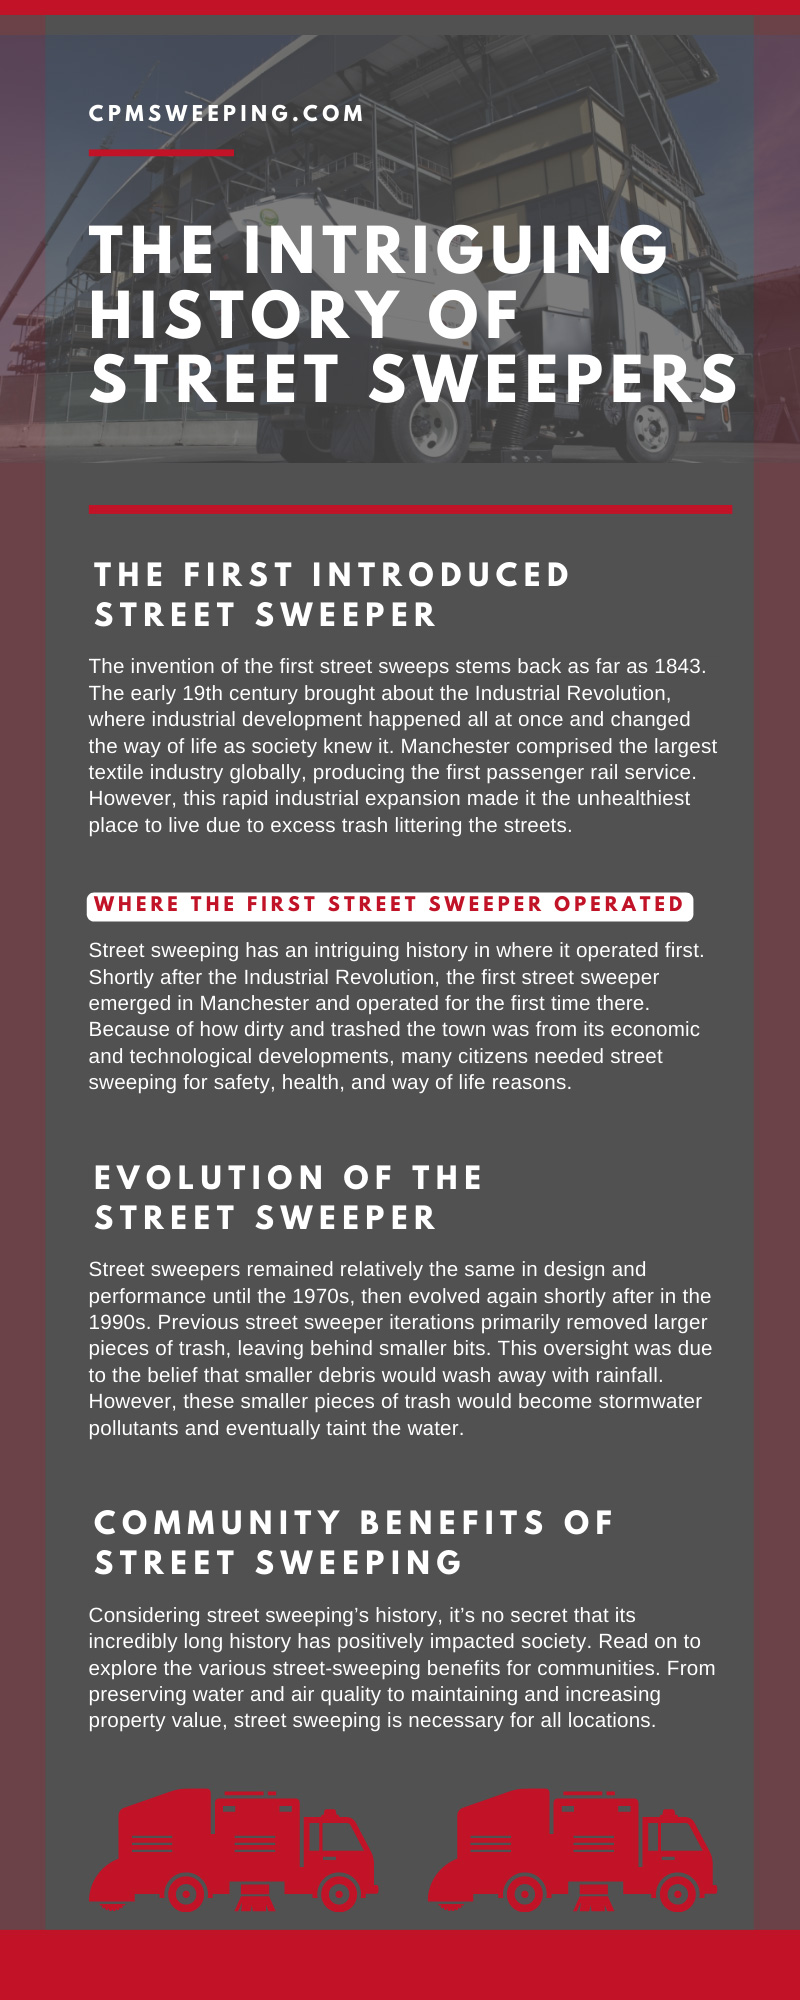 The Intriguing History of Street Sweepers
